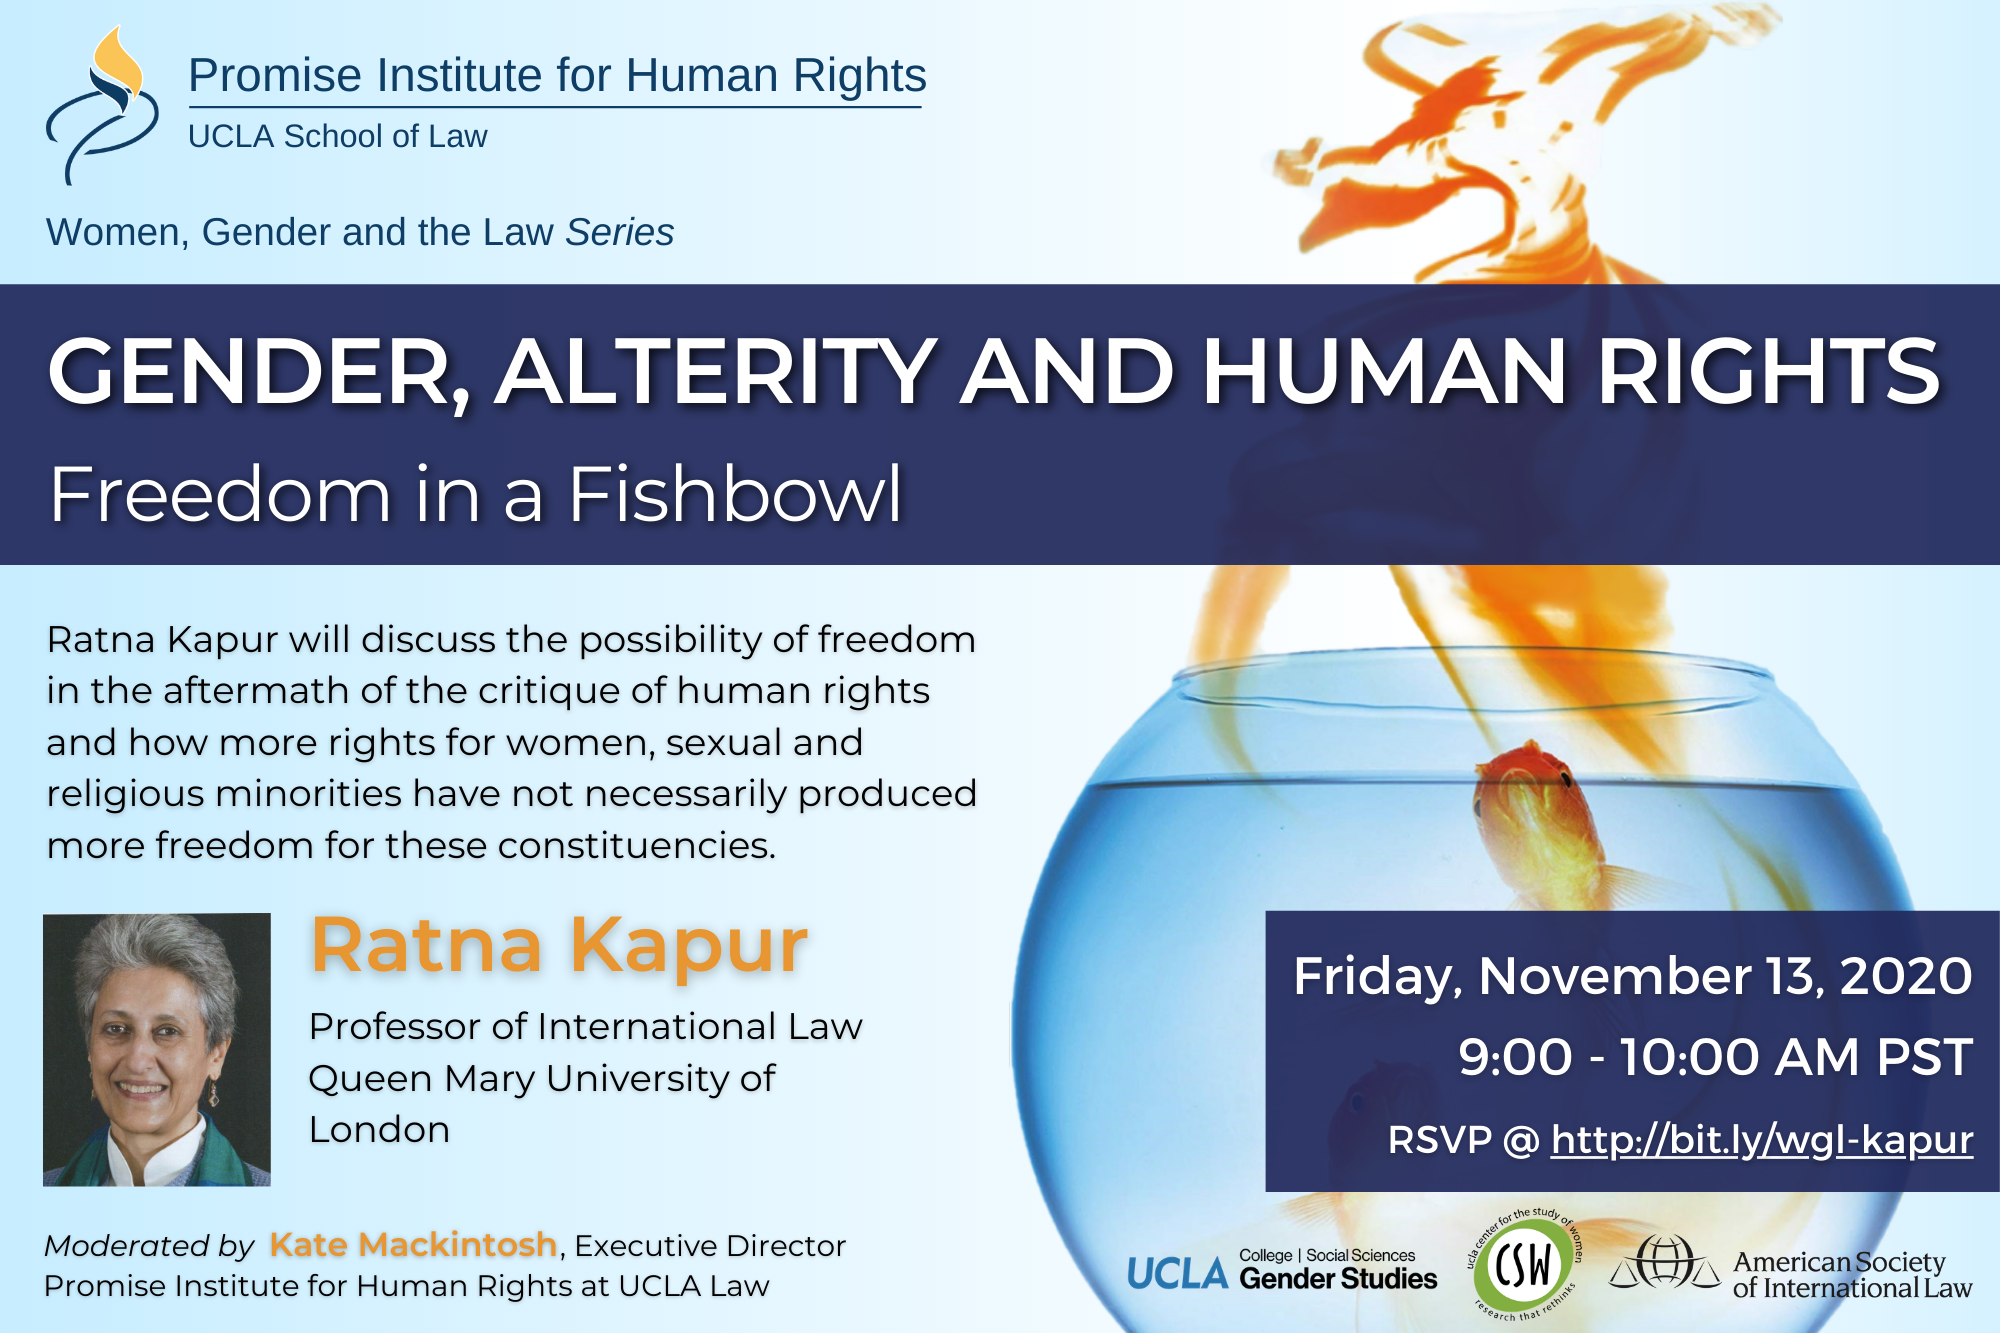 Flyer for Gender, Alterity and Human Rights: Freedom in a Fishbowl event on November 13th from 9 to 10 AM and featuring Ratna Kapur, Professor of Law at Queen Mary University of London